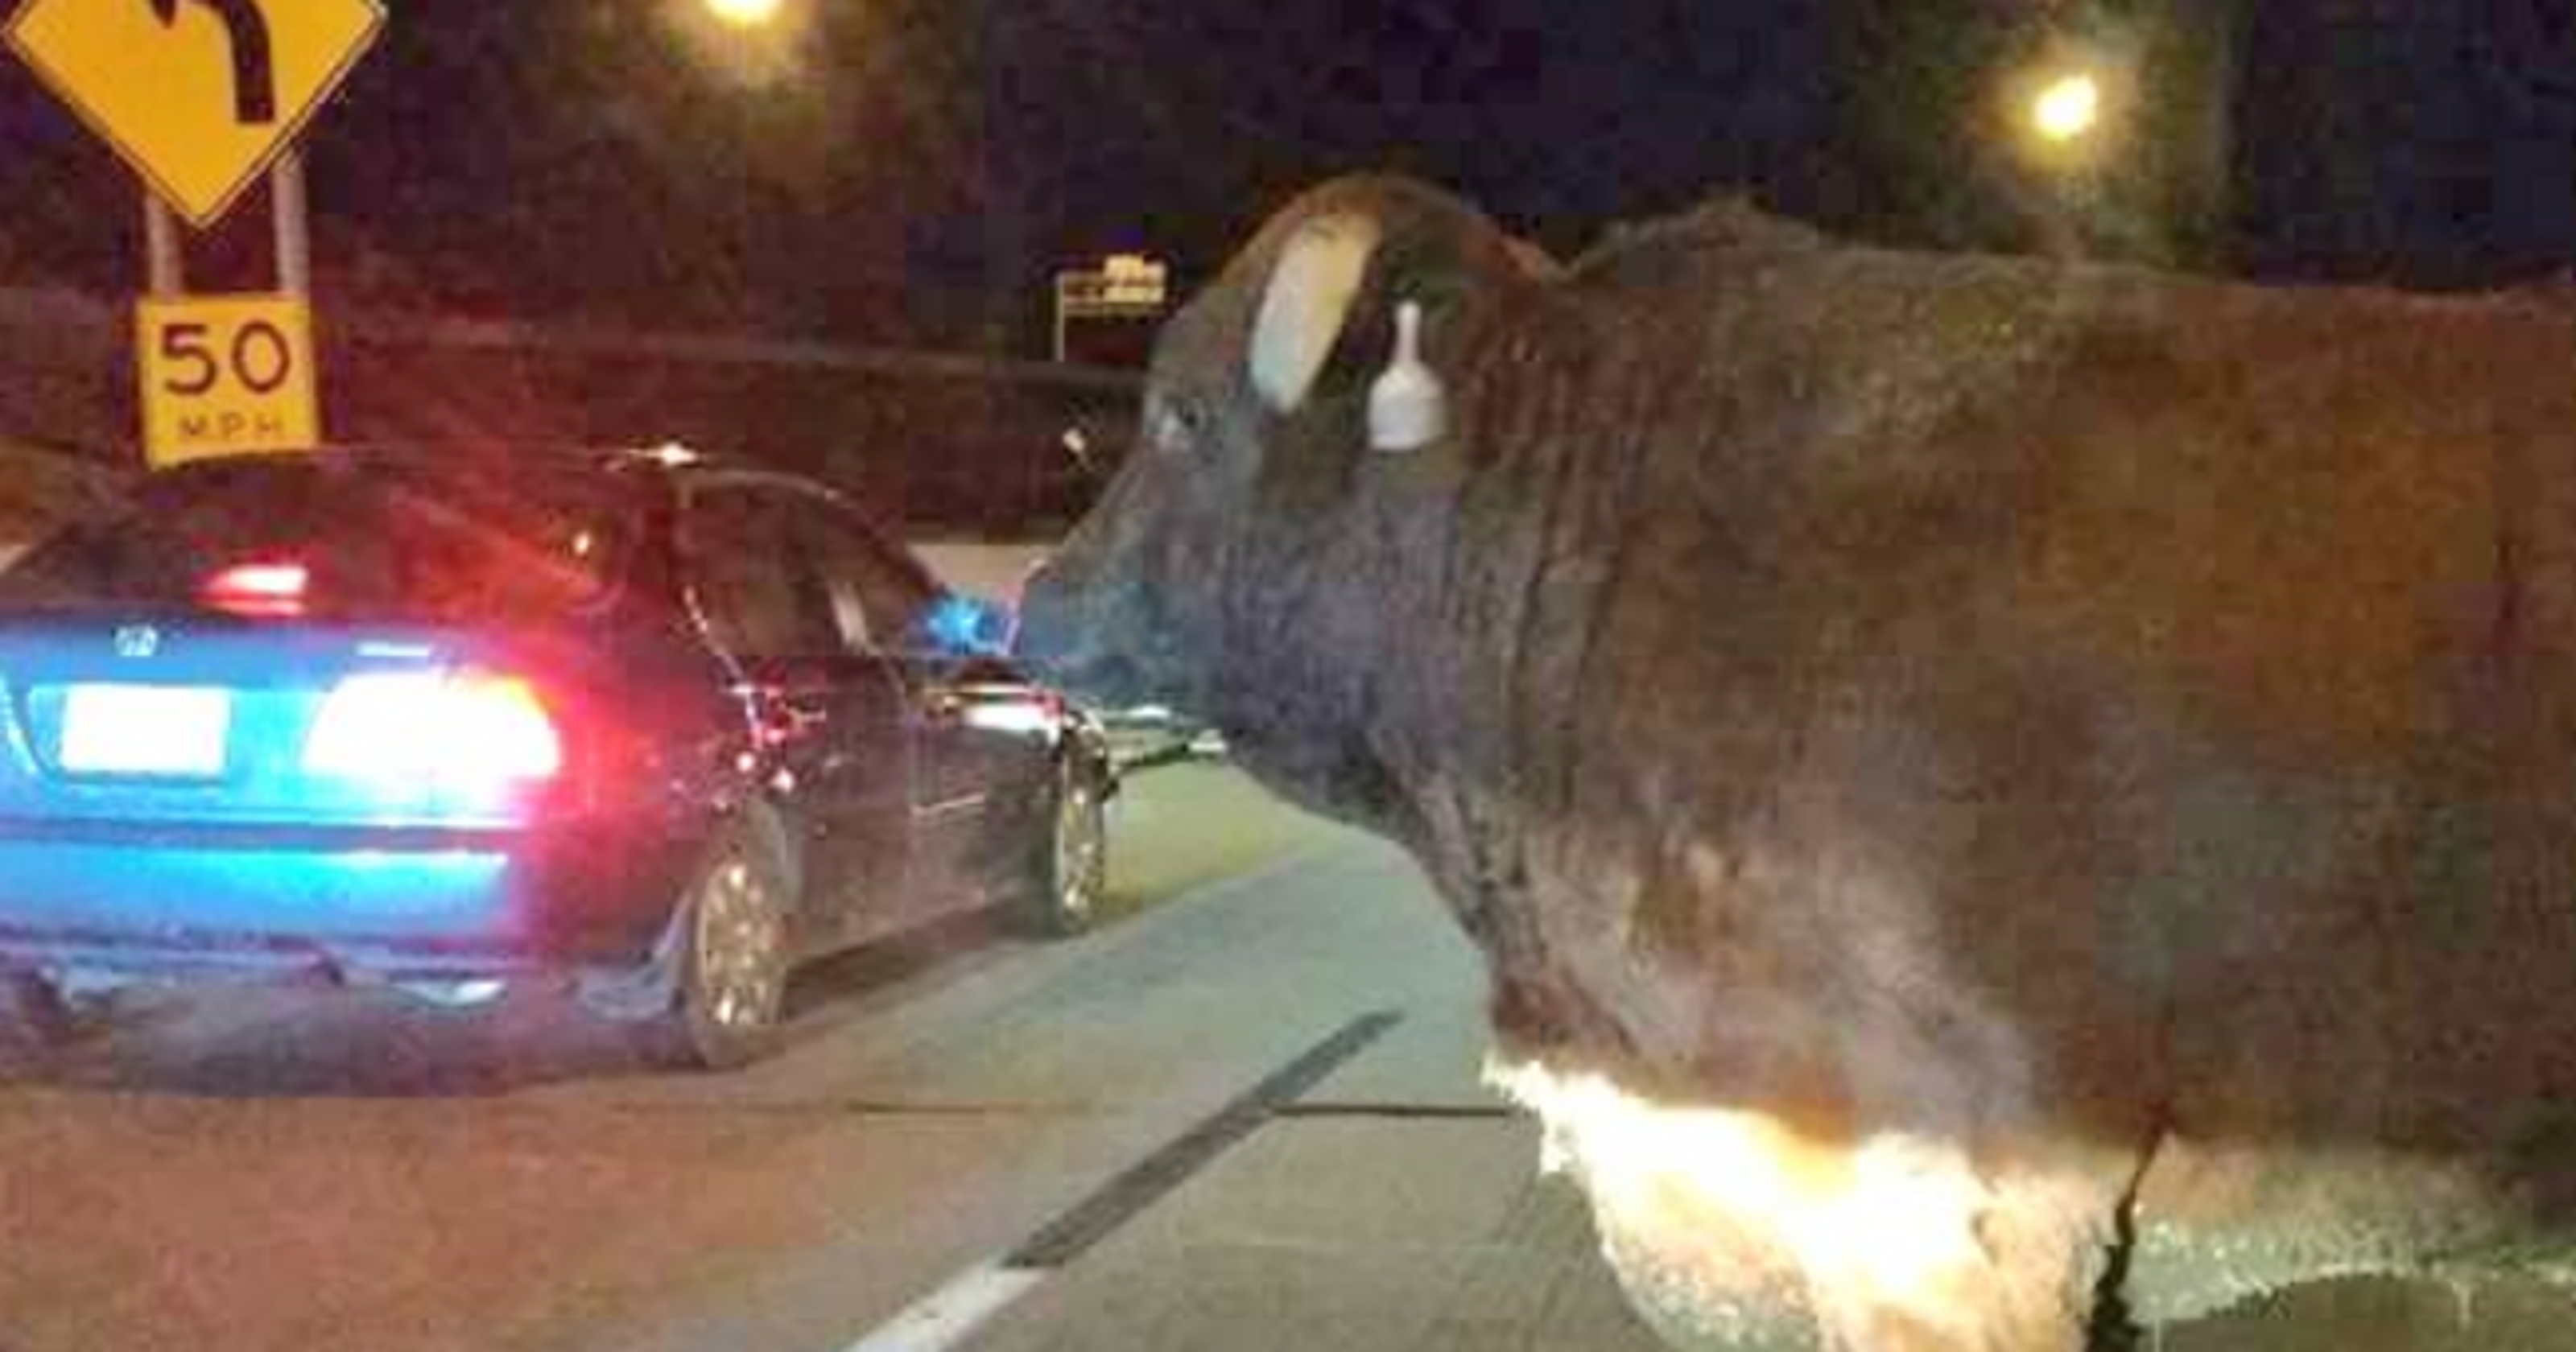 Cattle in Omaha roaming free after crash is 'small-town normal' in Nebraska